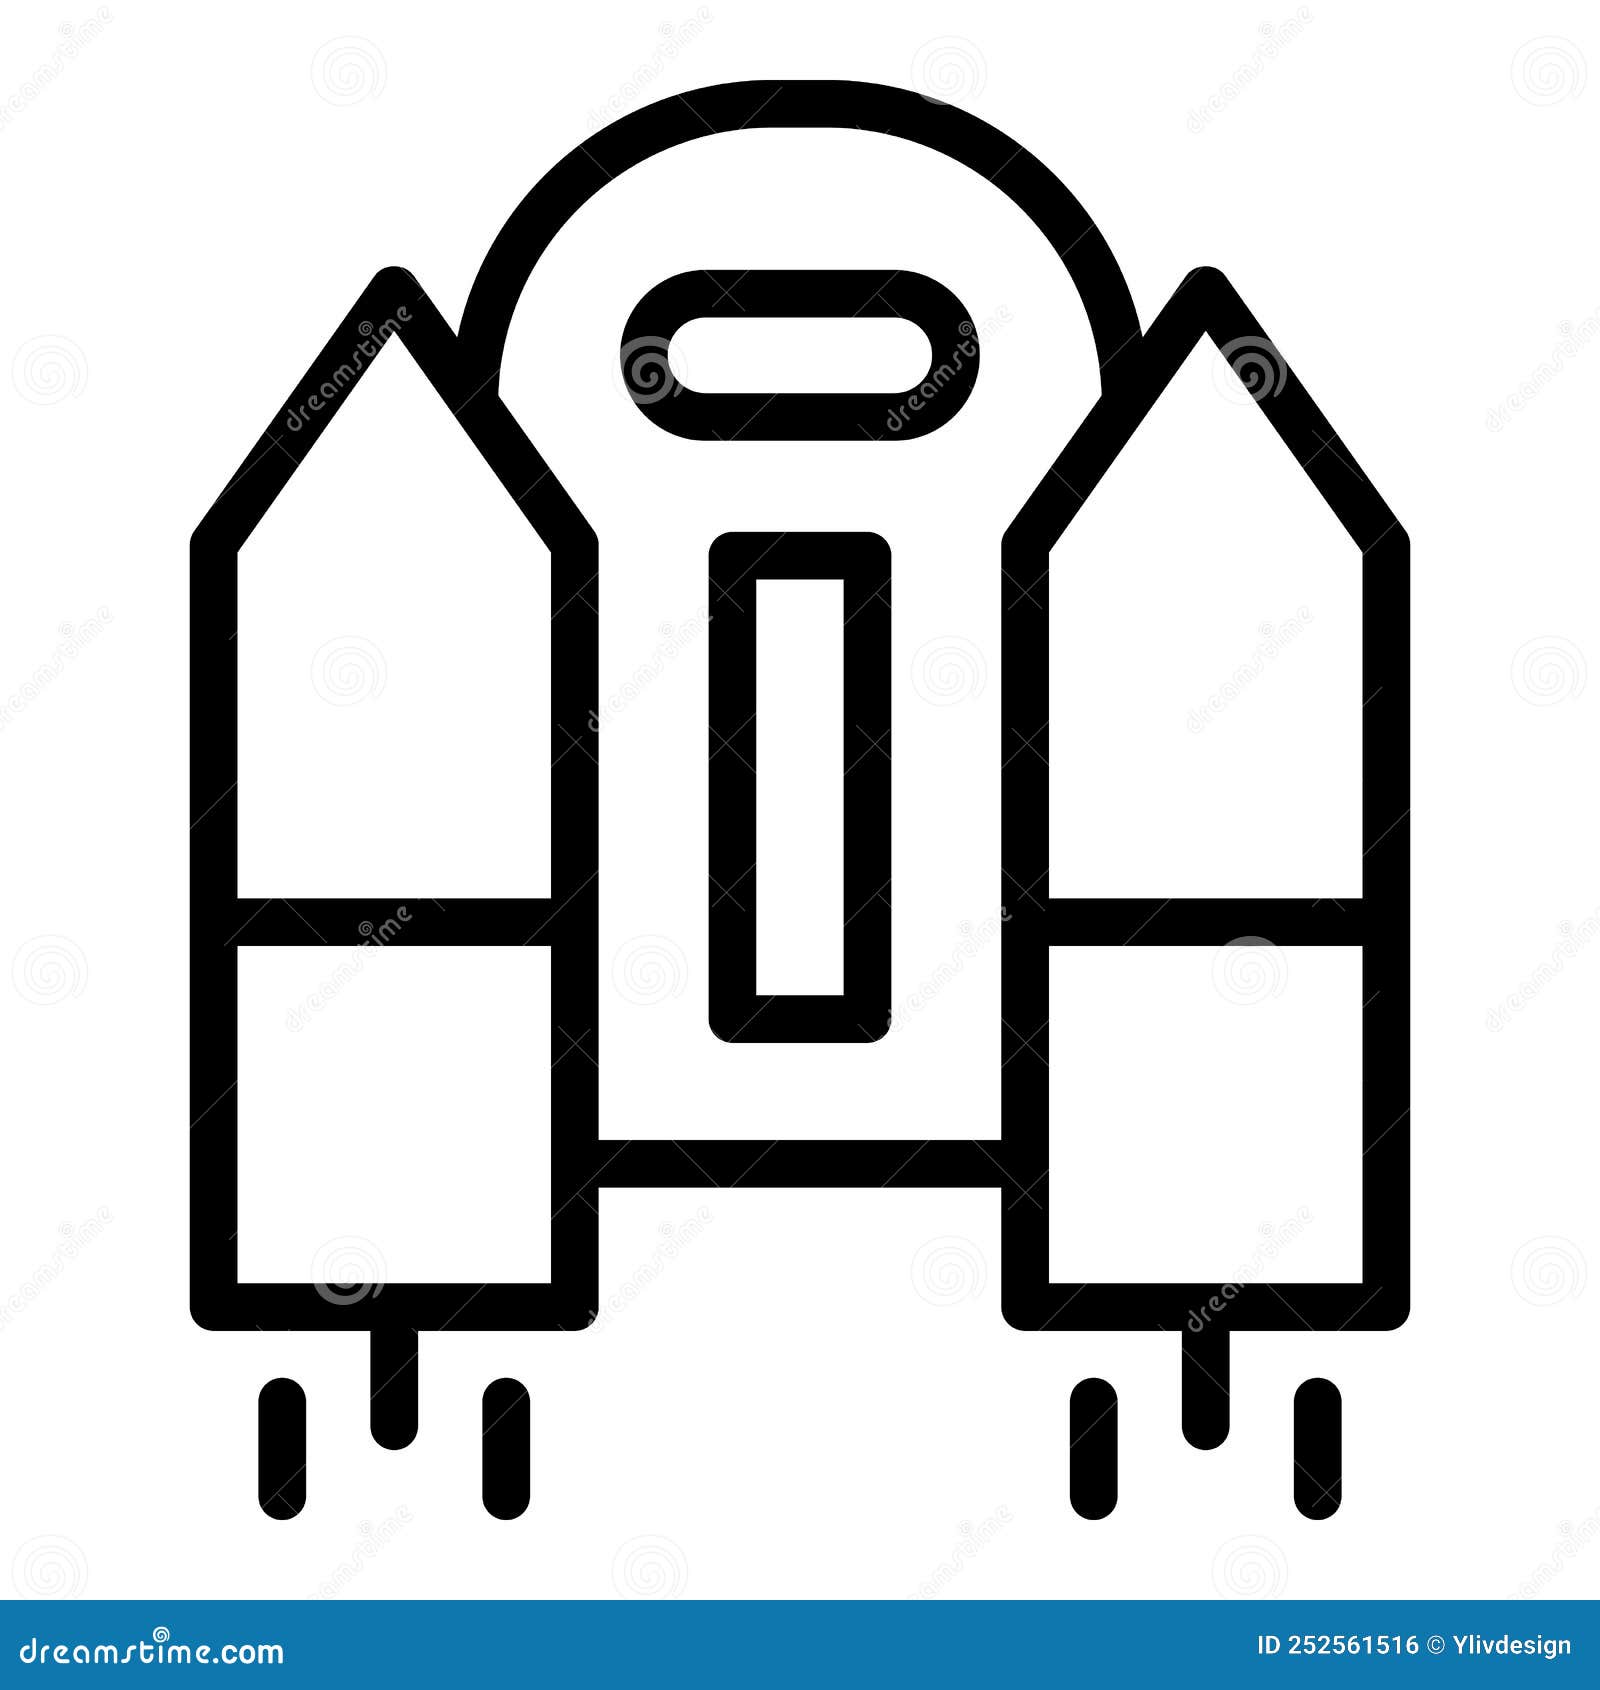 Outline Jetpack Vector Icon Isolated Black Stock Vector (Royalty